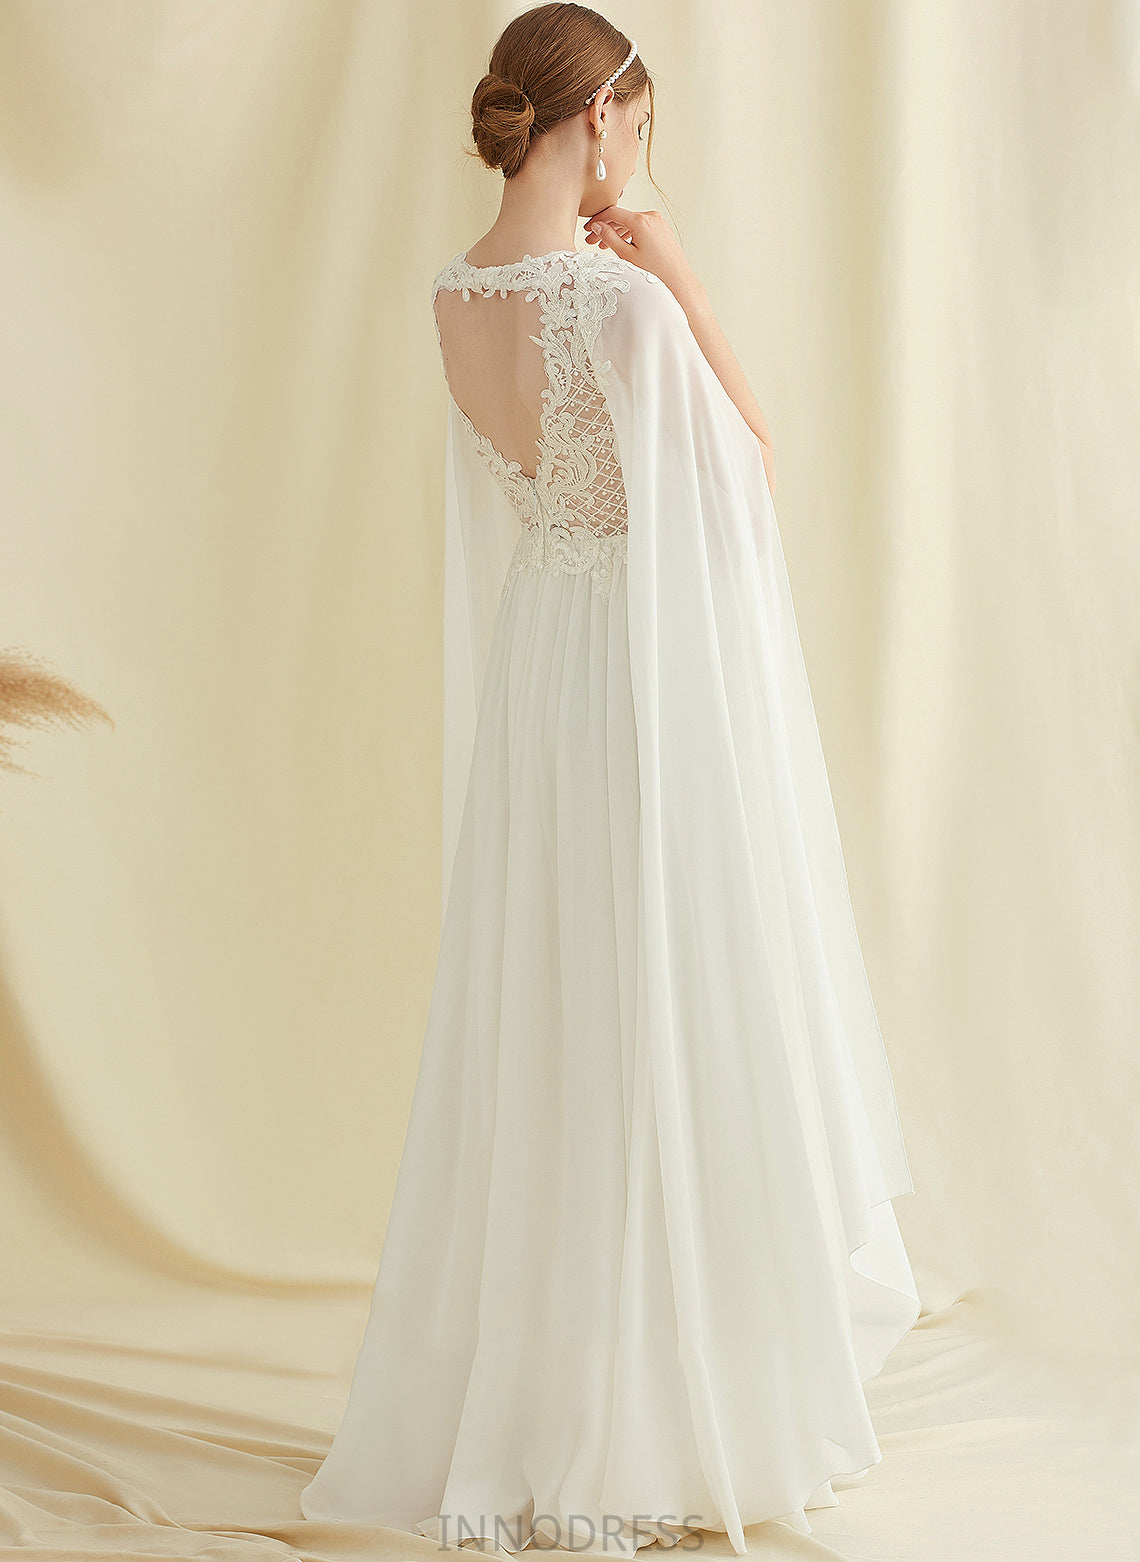 Chiffon With Dress Wedding Dresses Wedding Floor-Length V-neck Crystal A-Line Sequins Lace